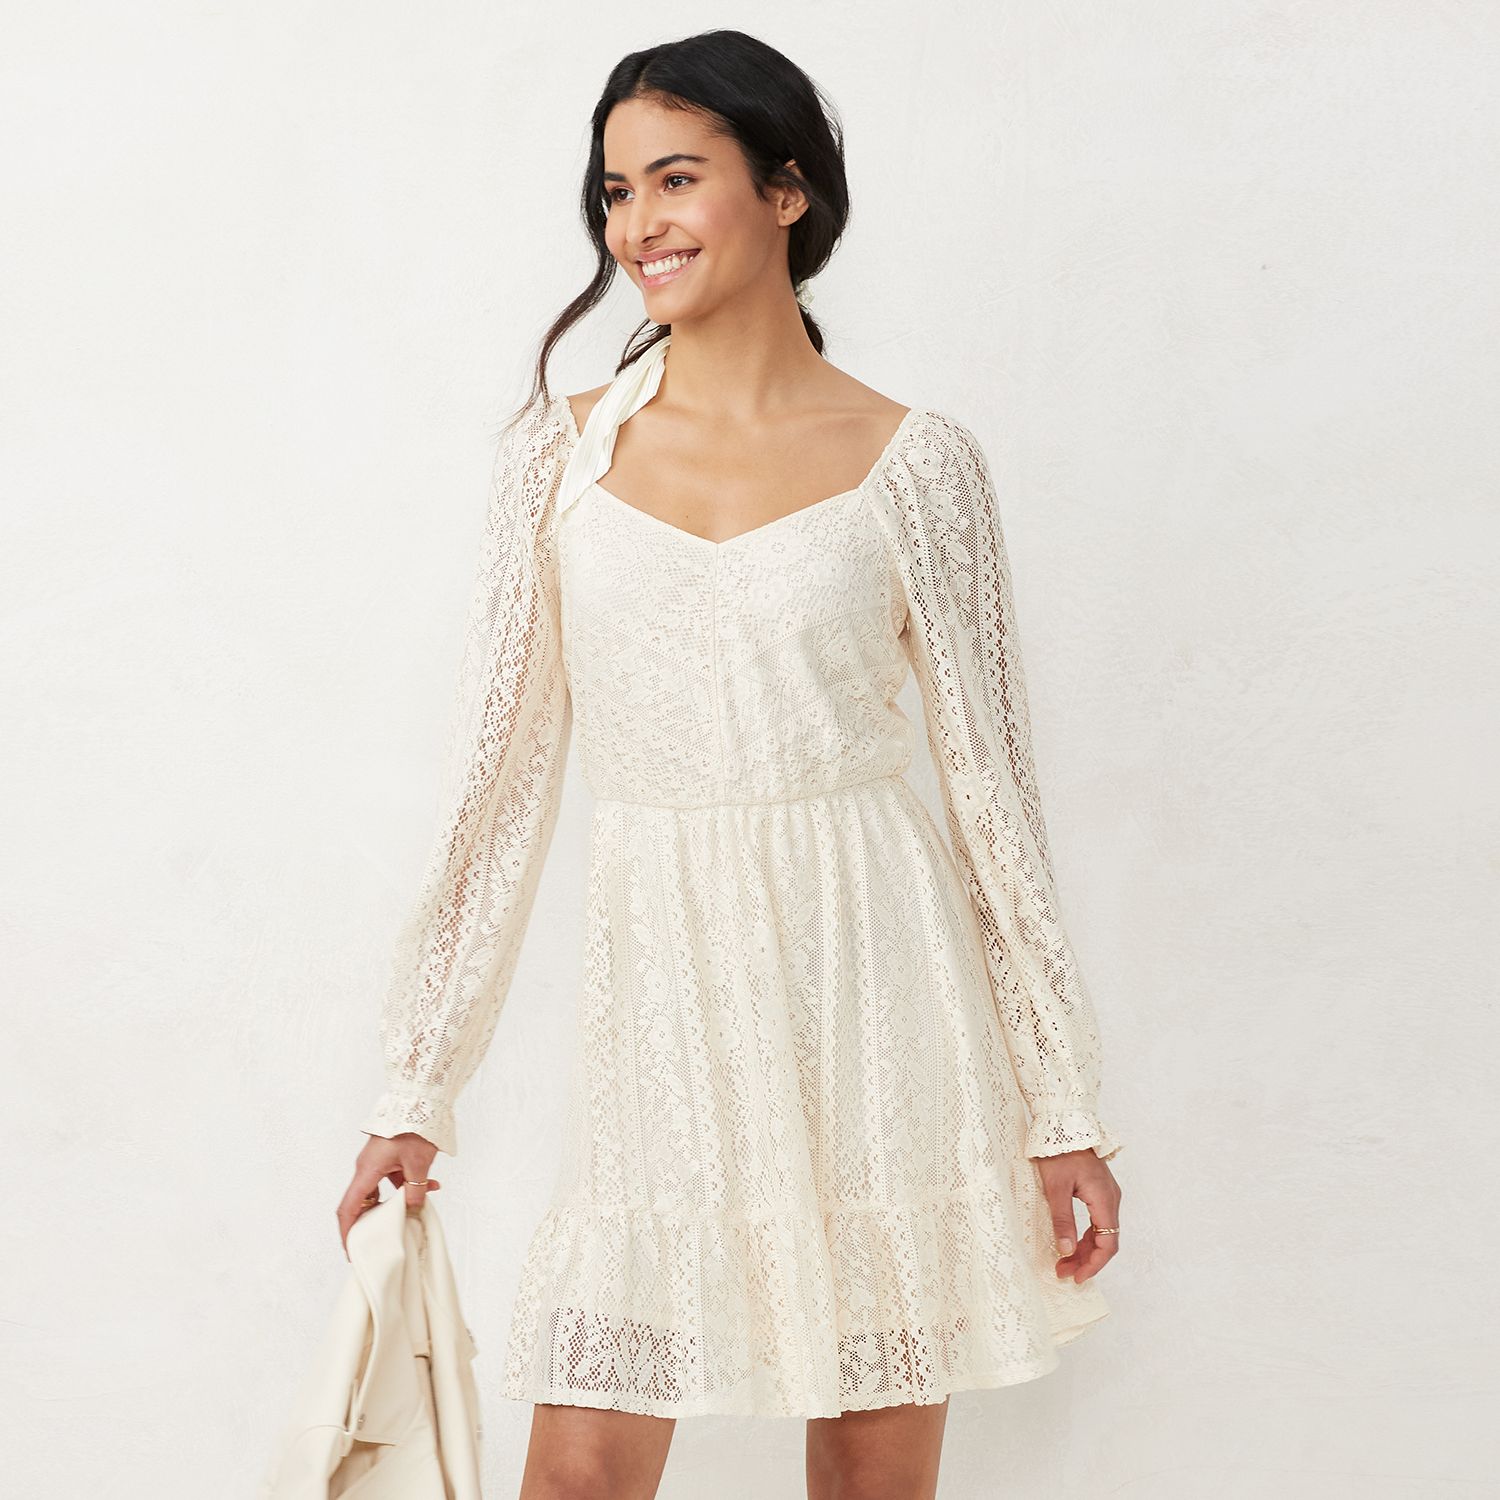 Image for LC Lauren Conrad Women's Long Sleeve Lace Mini Dress at Kohl's.